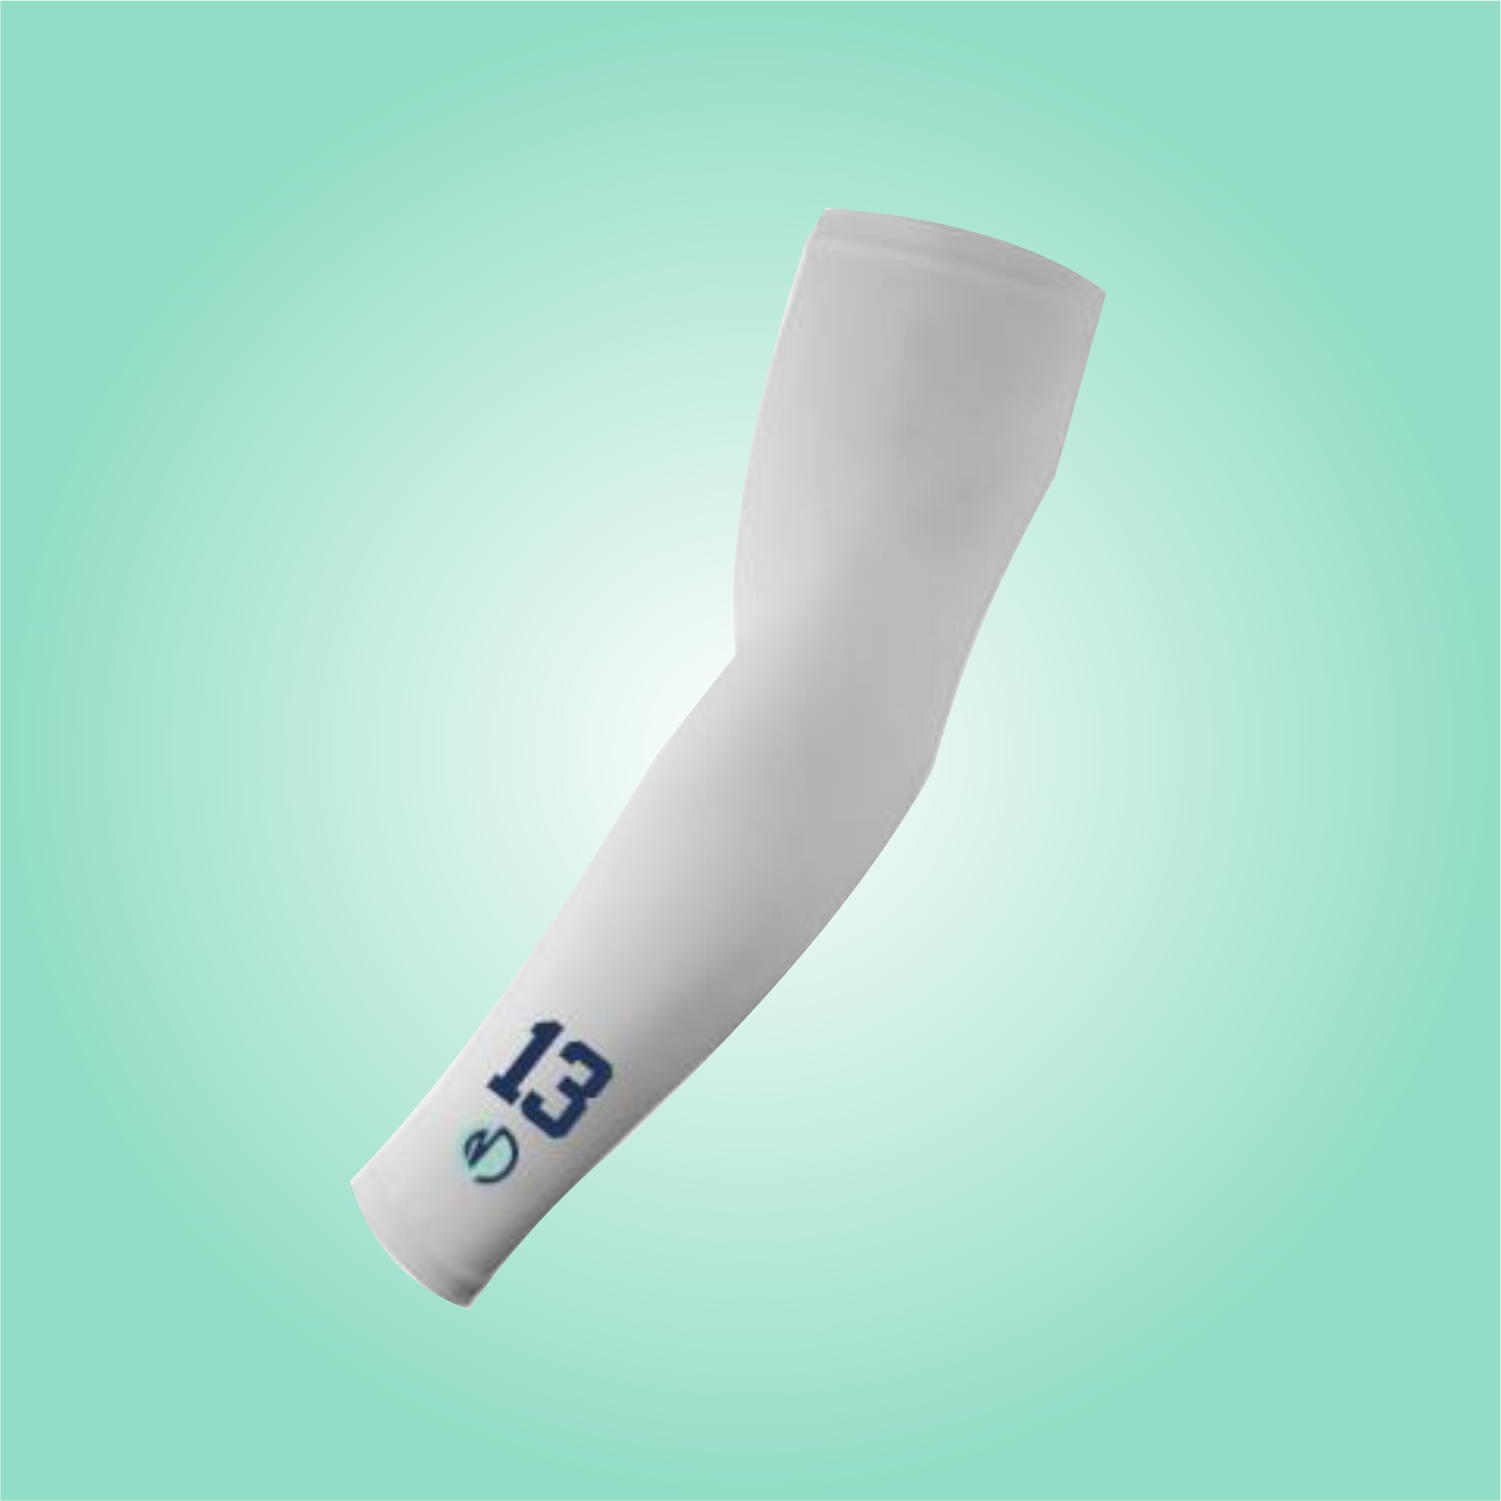 White Compression Arm Sleeve